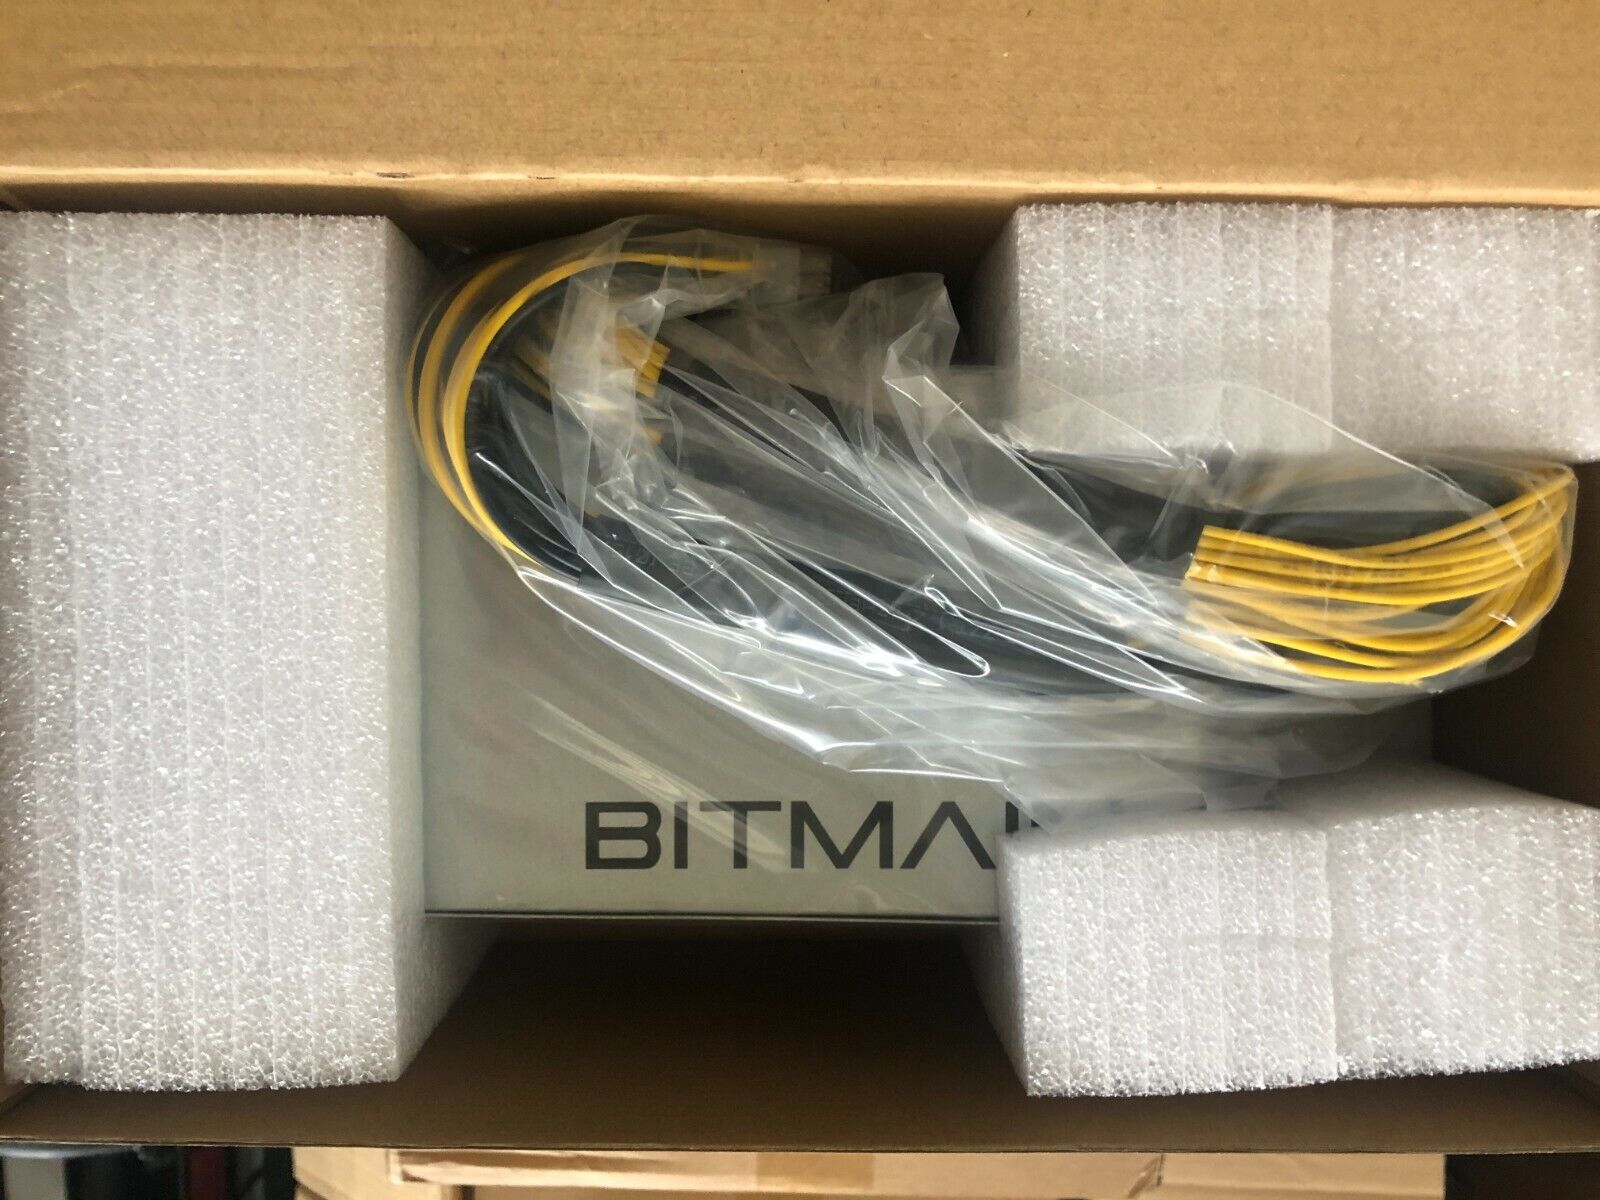 Bitmain Max 74% OFF APW7 1800W Oakland Mall Power Supply APW7-12-18 for Antminer